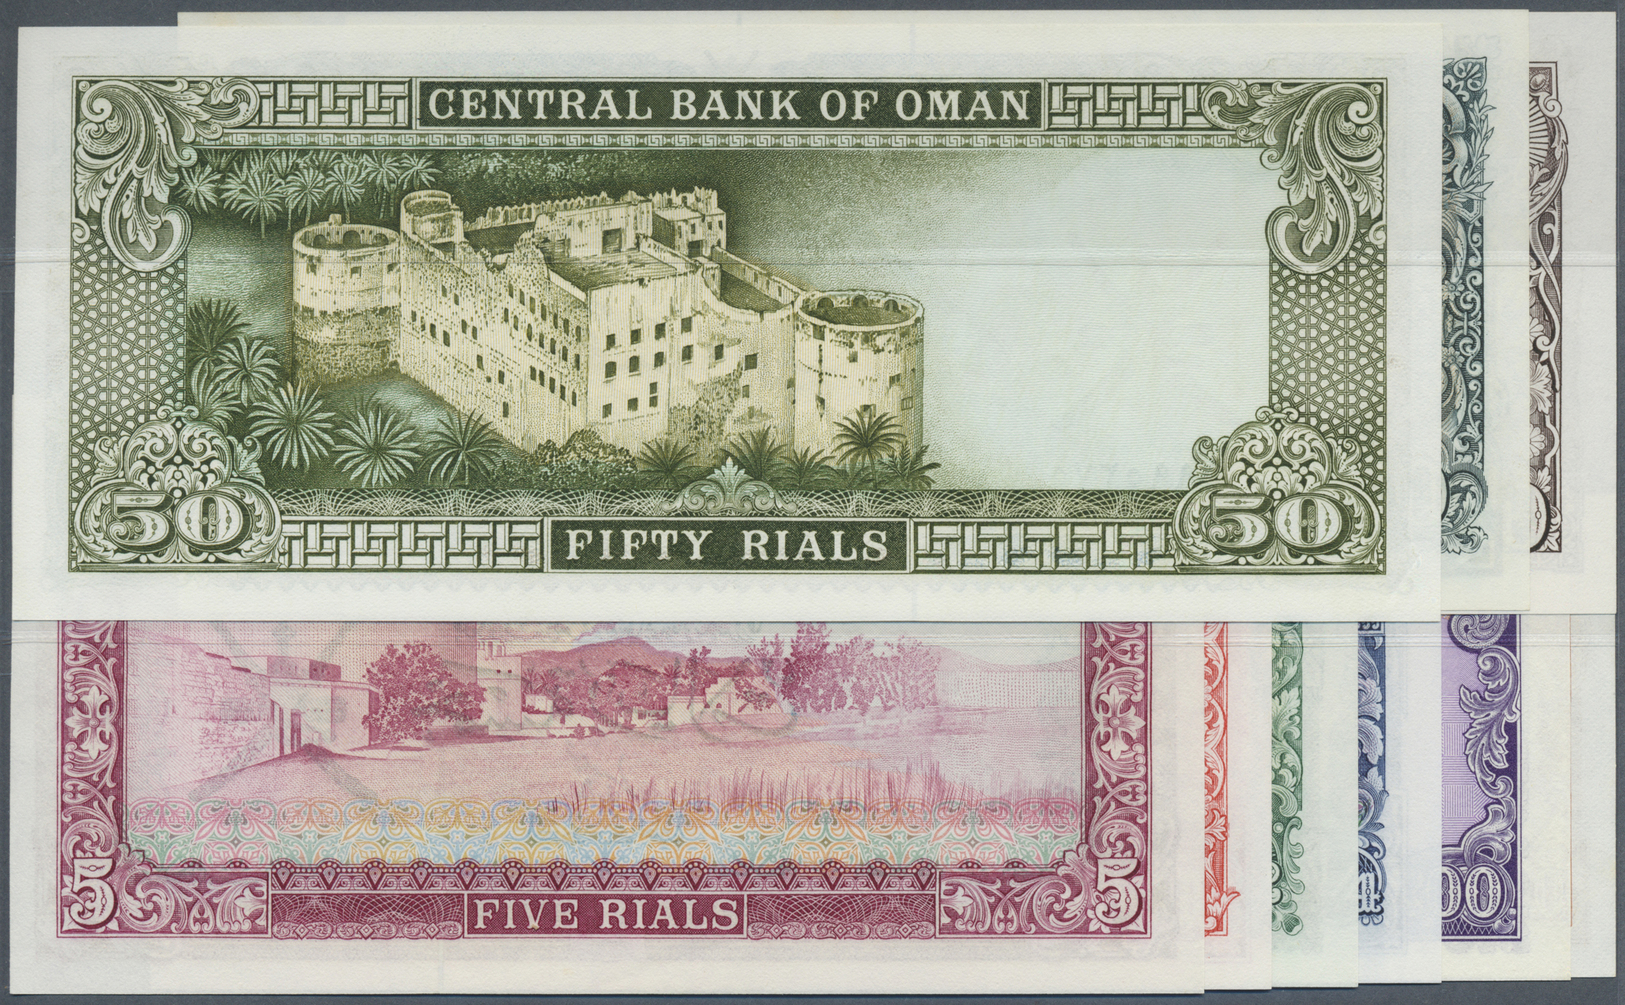 01925 Oman: Complete Set Of 9 Notes From 100 Baisa To 50 Rials ND P. 13-21, The 1, 5 And 10 Rials In AUNC, All Others In - Oman